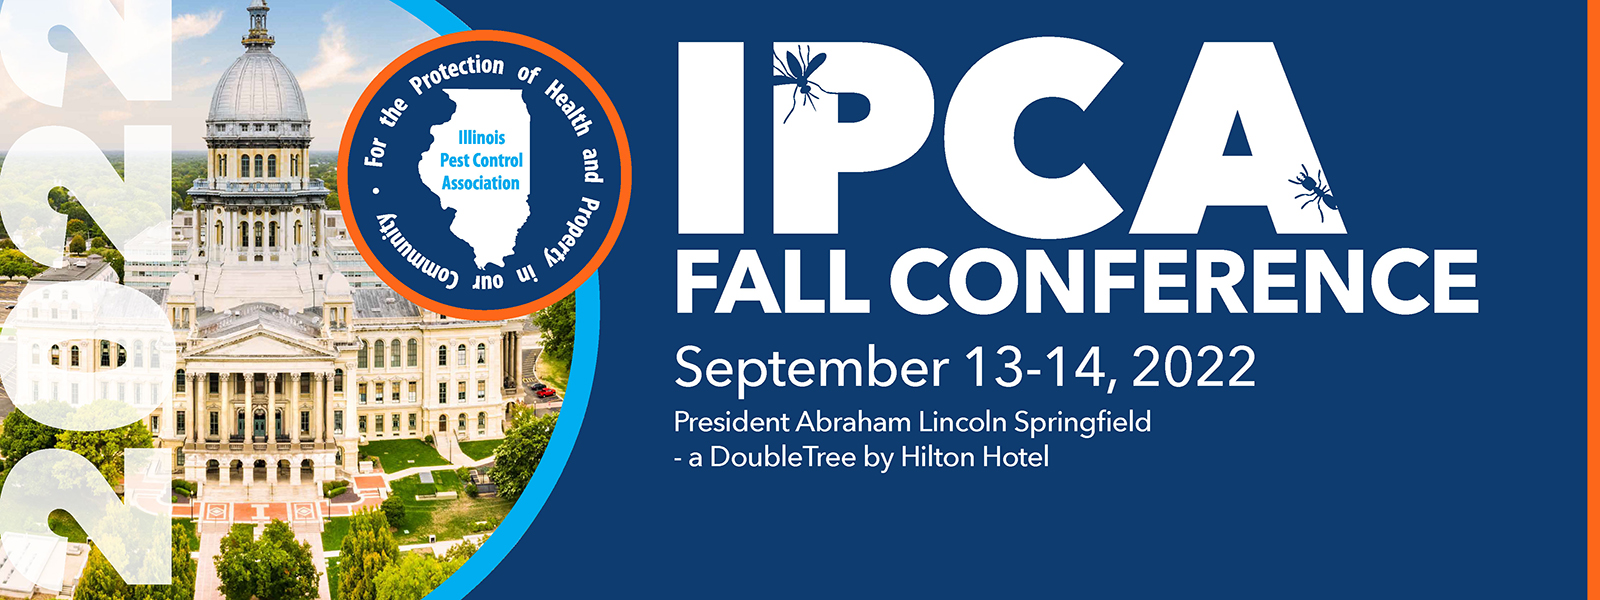 IPCA Fall Conference